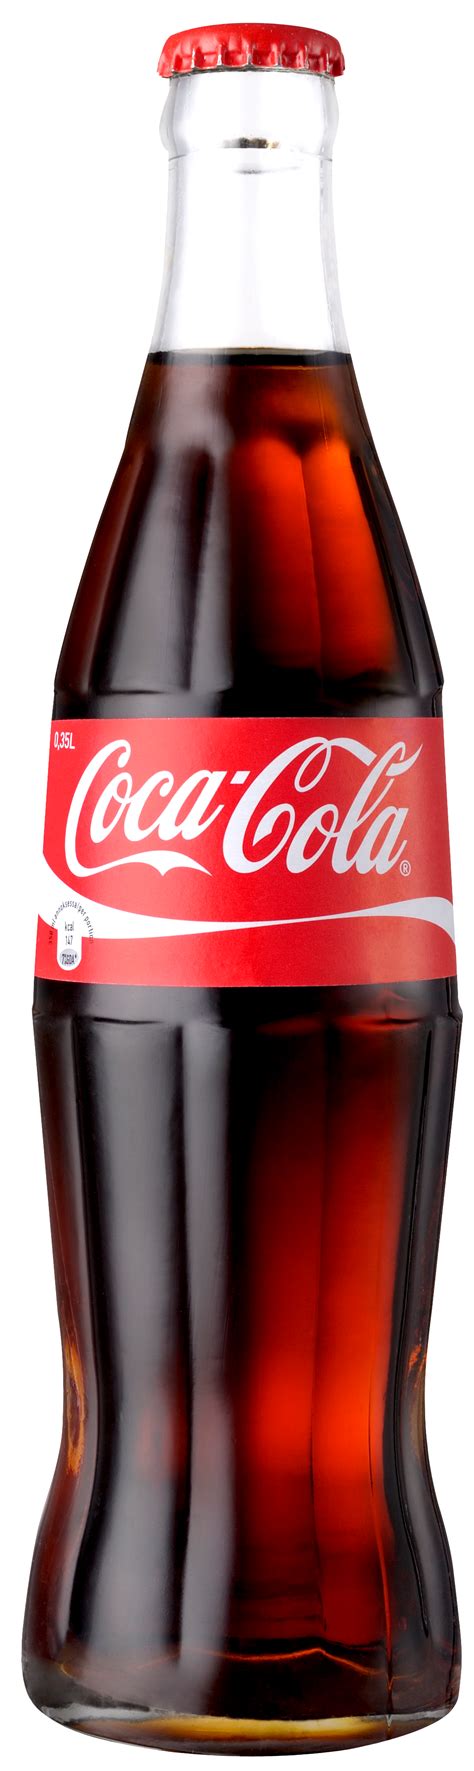 Coca Cola PNG Image for Free Download